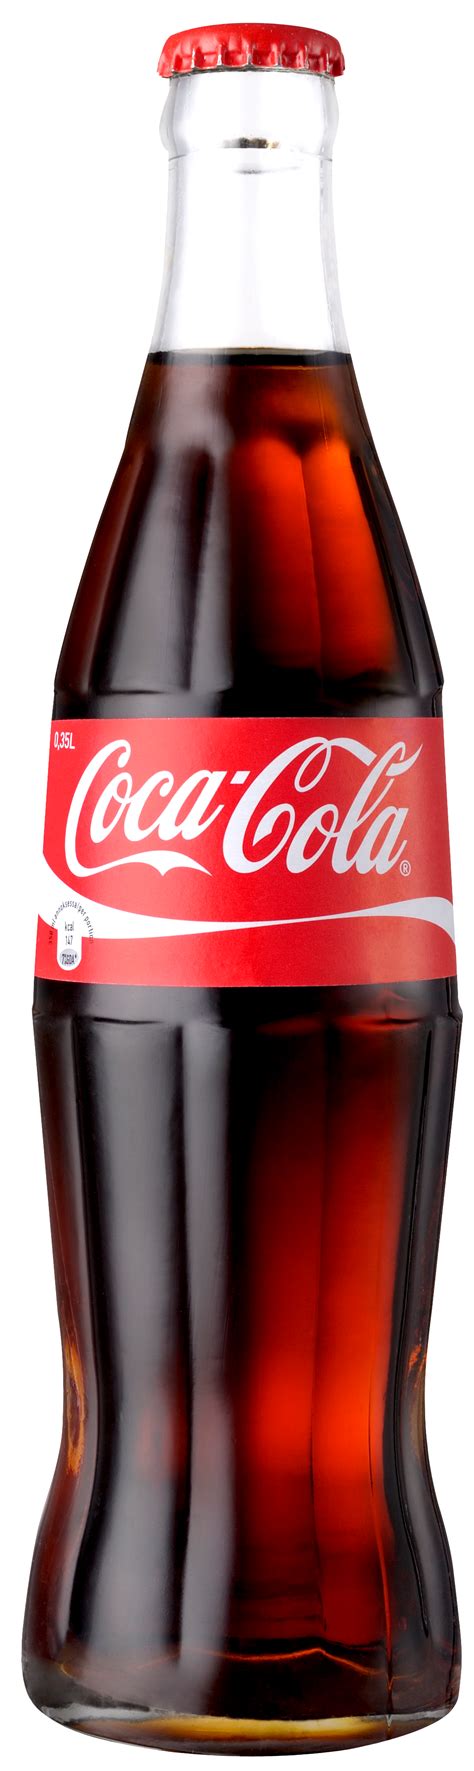 Coca Cola PNG Image for Free Download